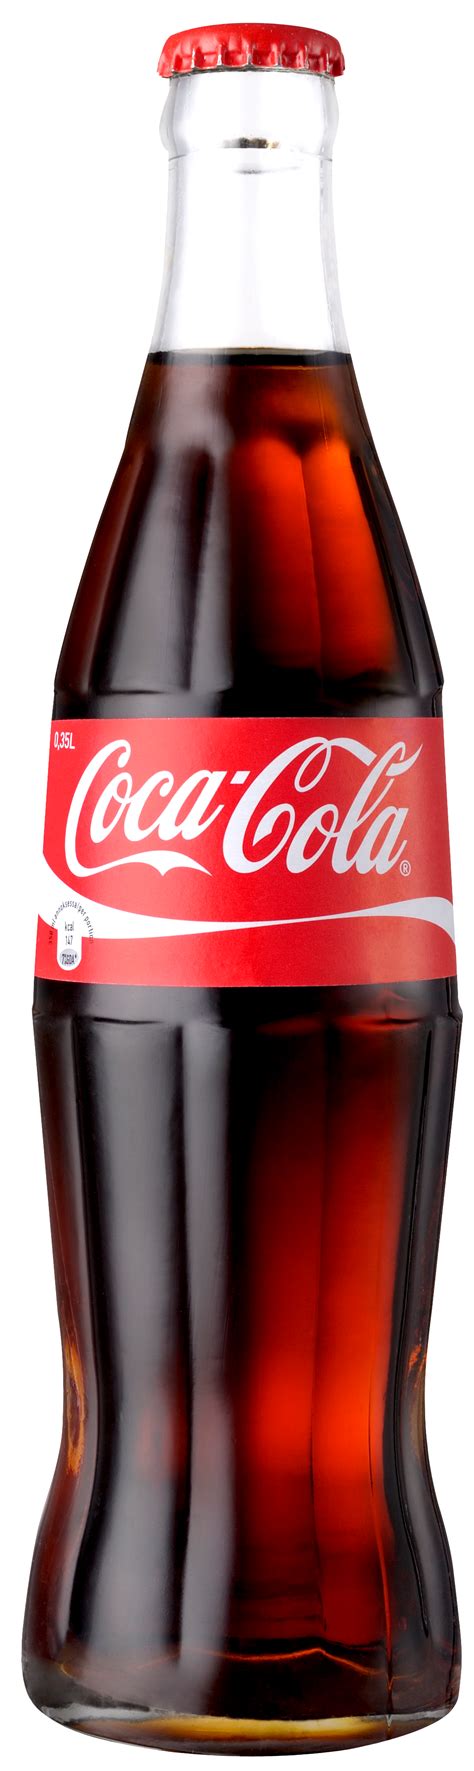 Coca Cola PNG Image for Free Download